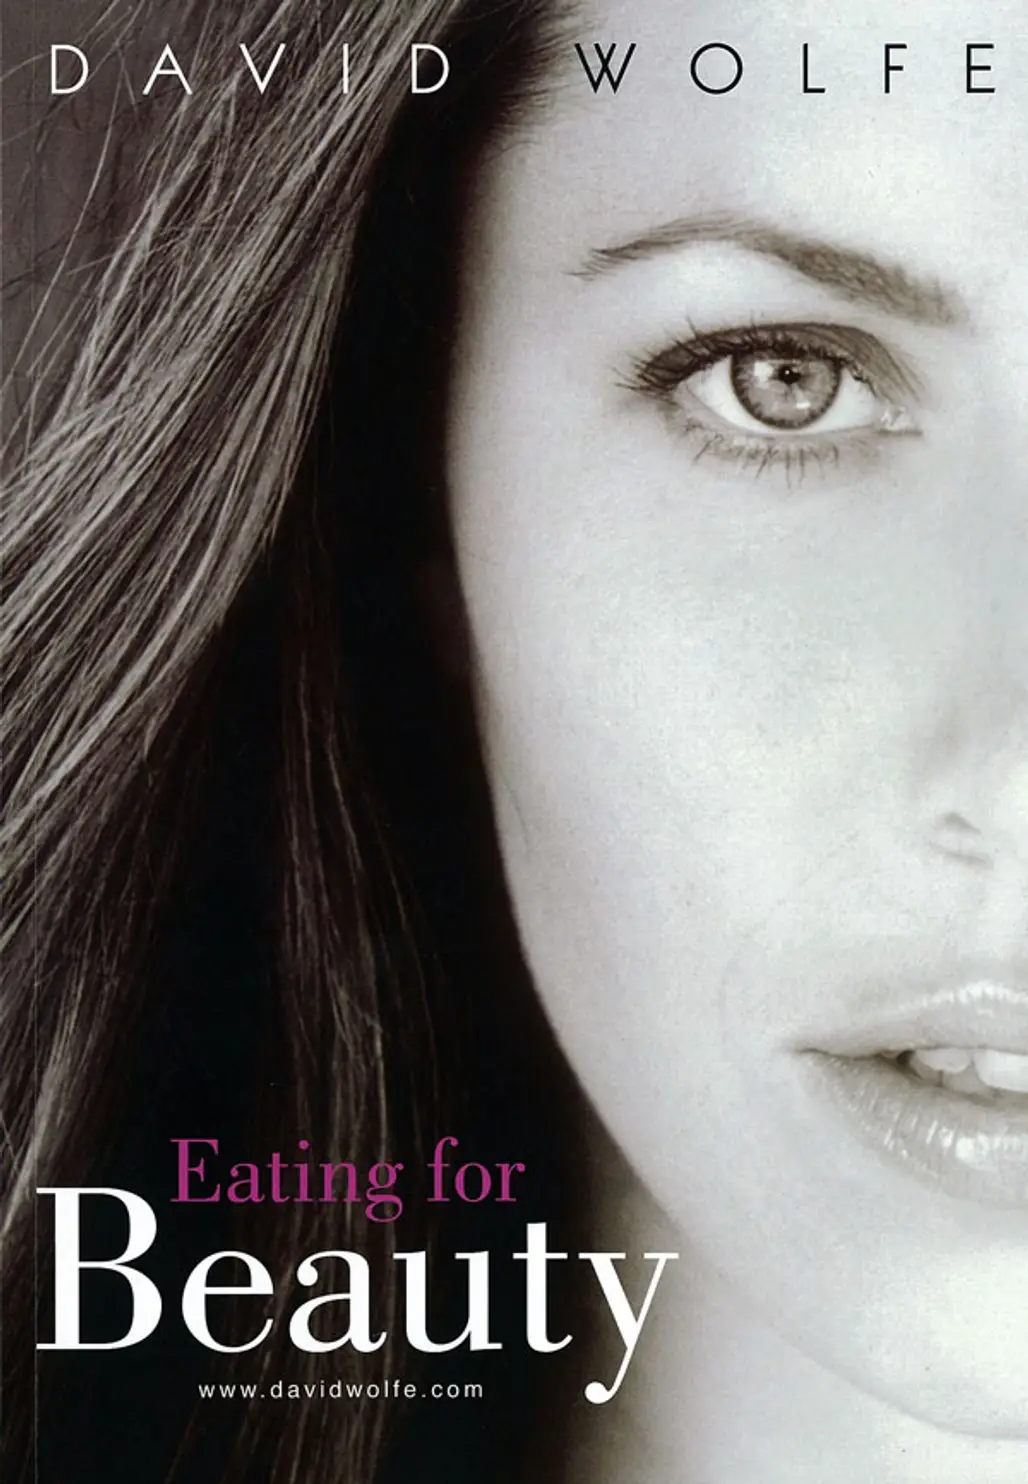 Eating for Beauty by David Wolfe